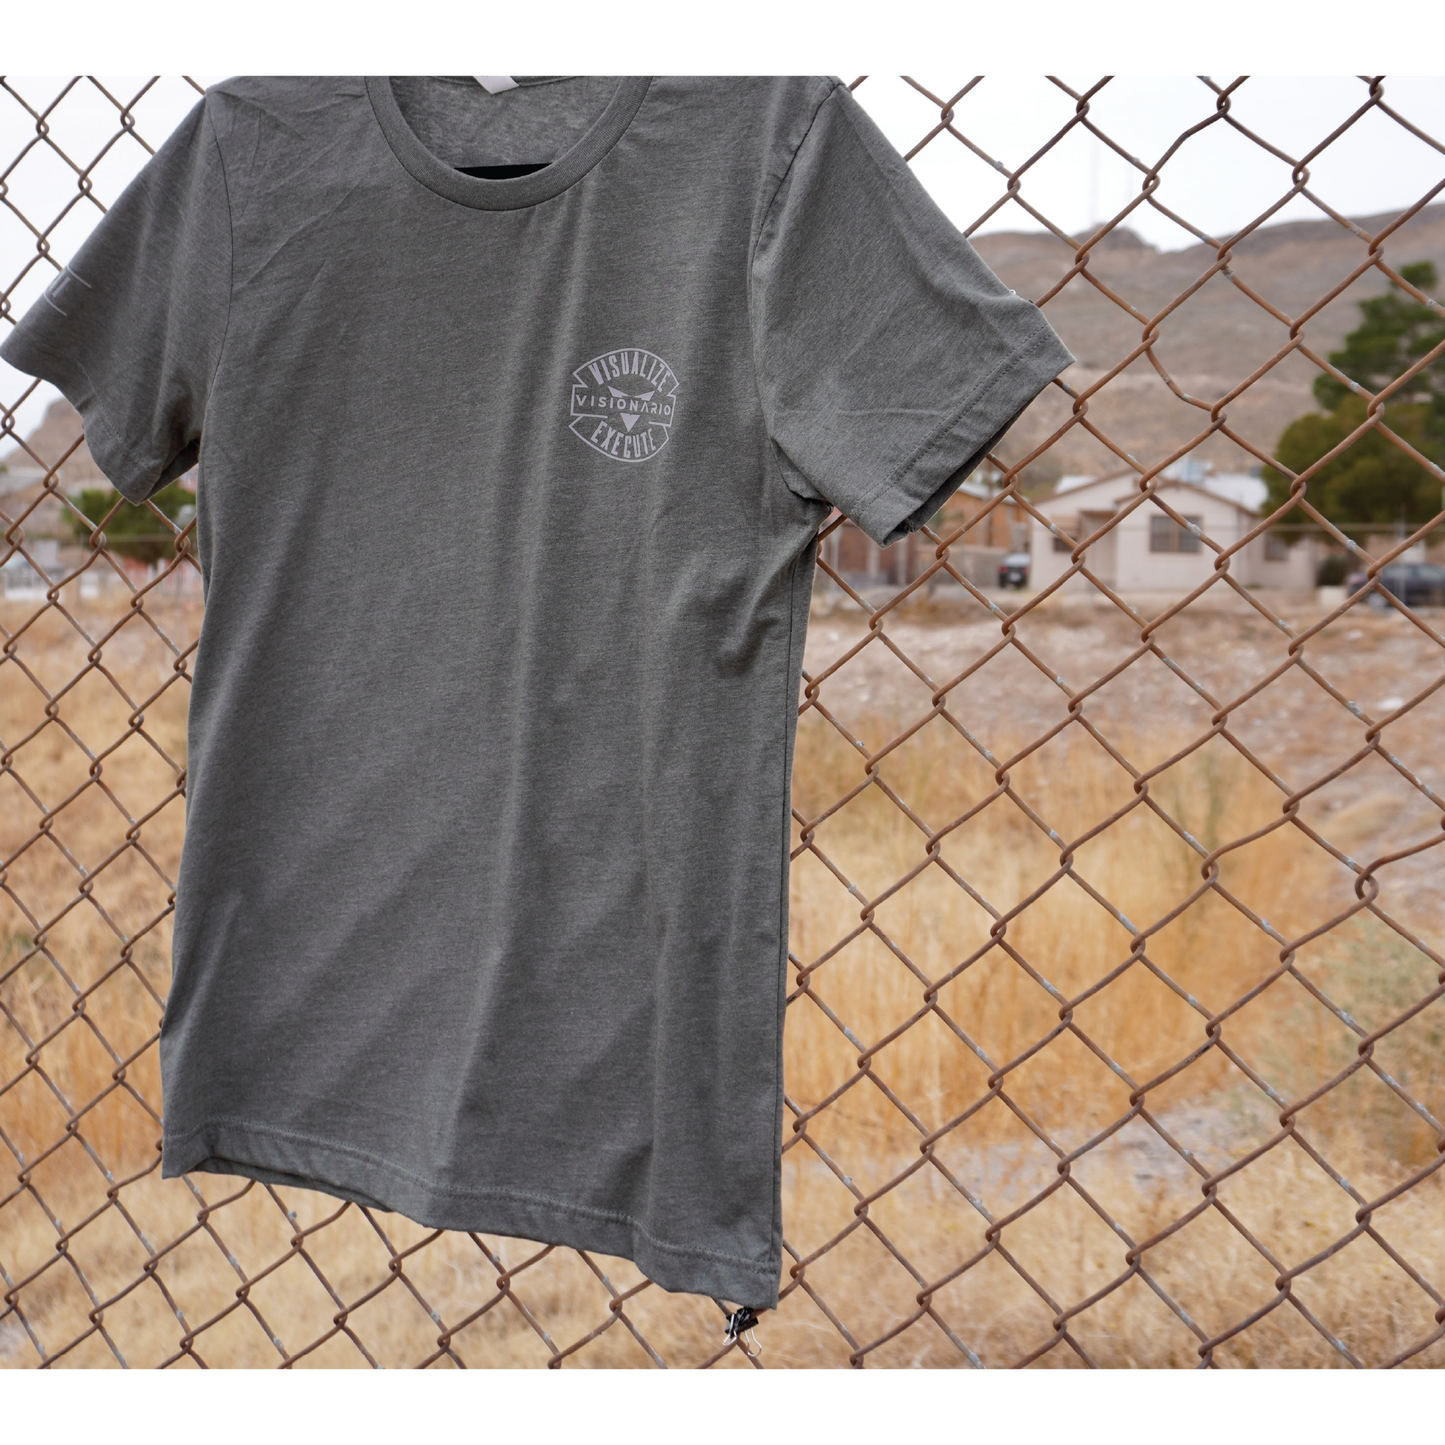 HEATHER MILITARY GREEN TEE GREY AUTHENTIC EMBLEM POCKET SIZE DESIGN (LEFT SIDE). Roman numerals "2021" STAMPED ON RIGHT SLEEVE.